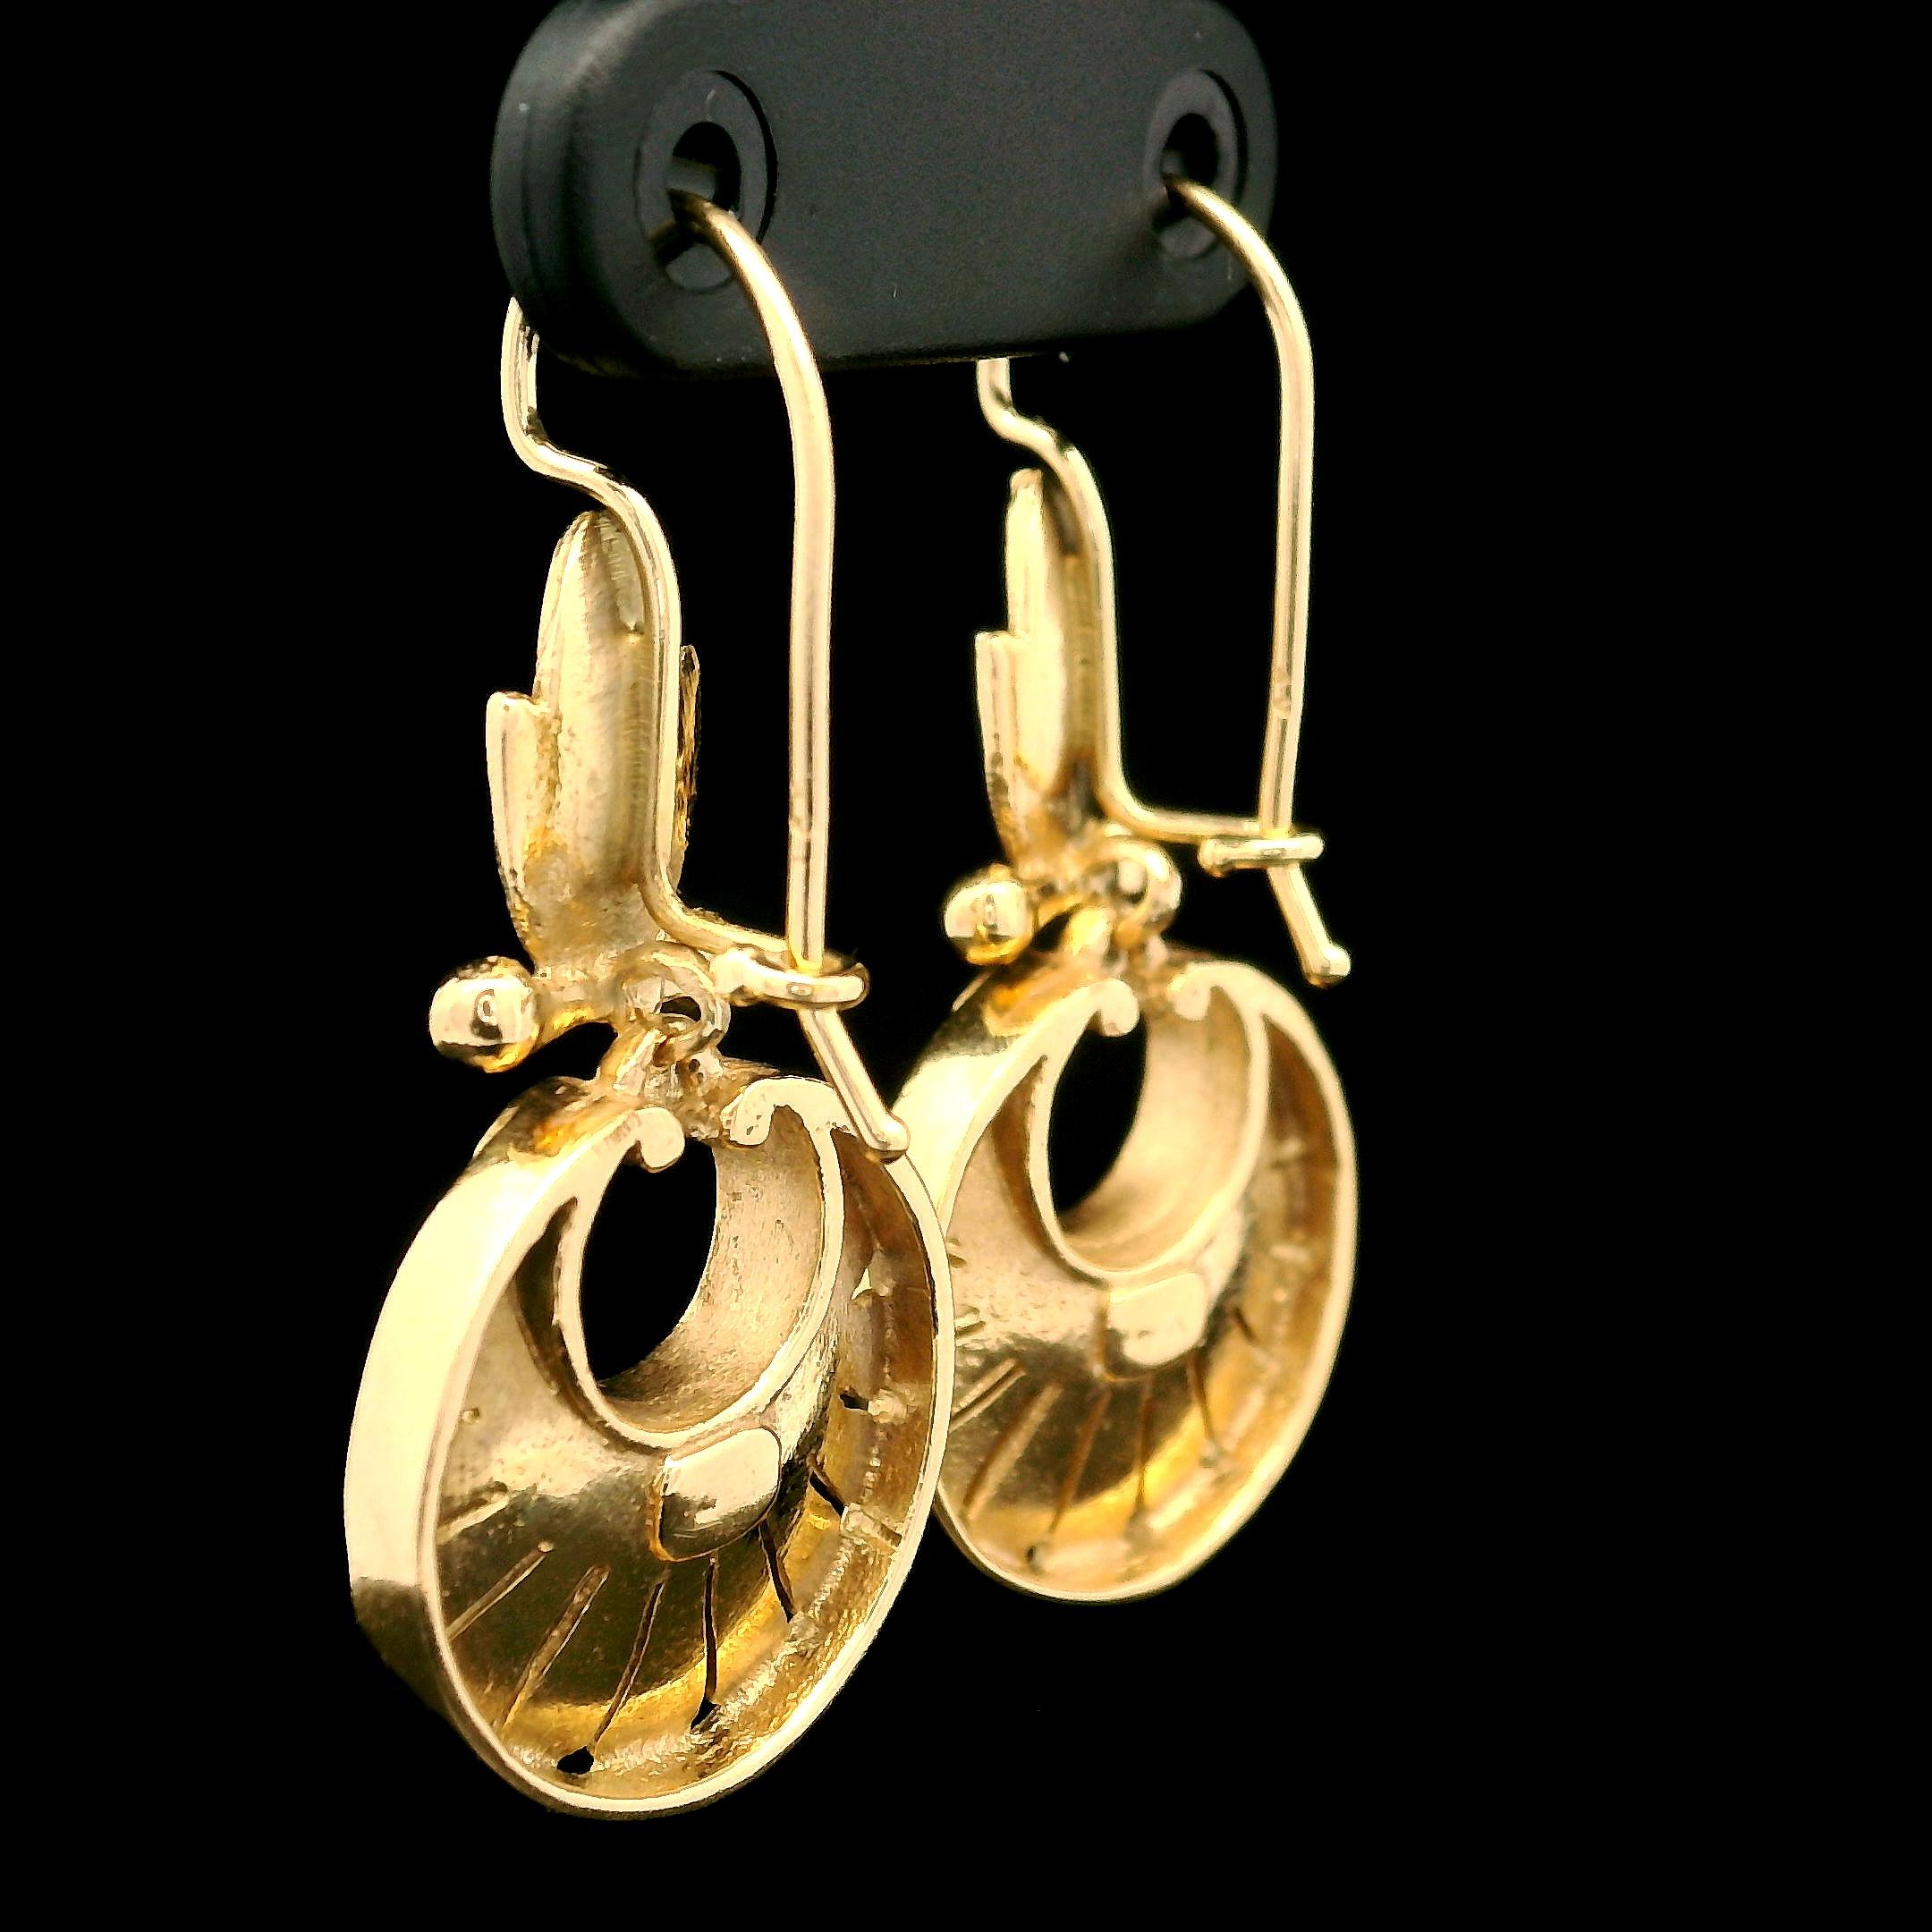 Vintage Etruscan Revival 14k Yellow Gold Ornate Dangle Drop Earrings For Sale 3